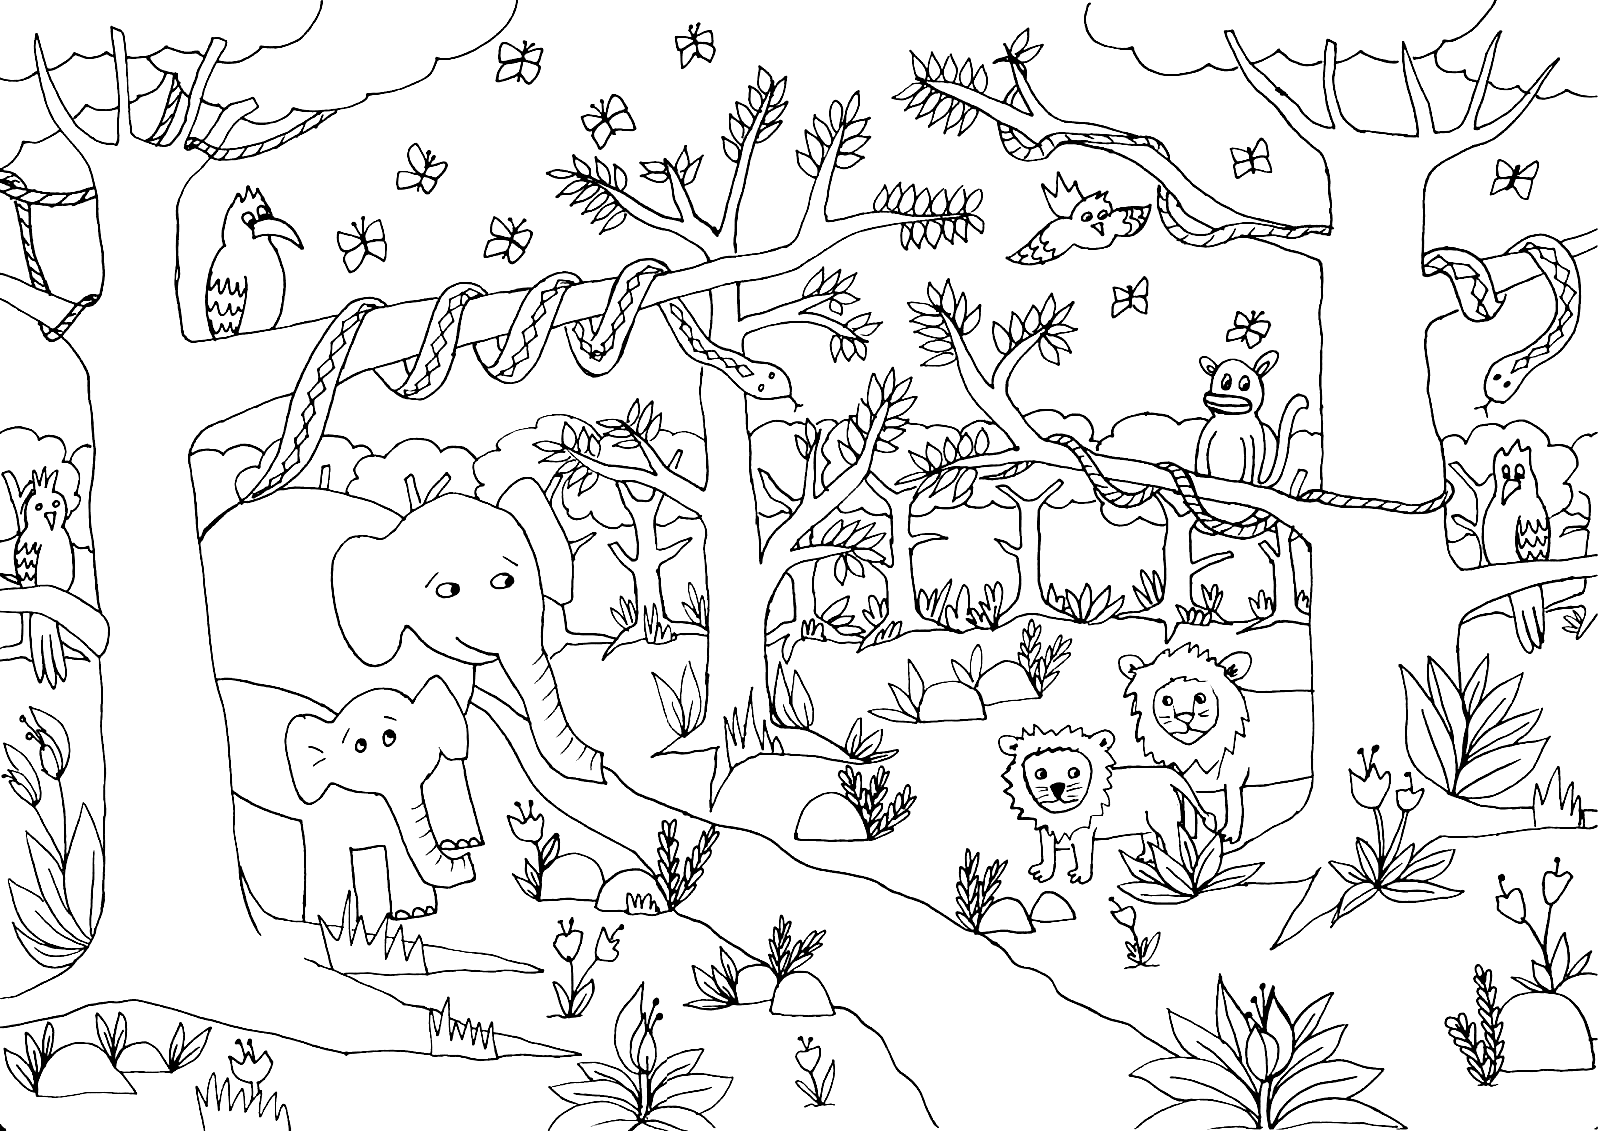 Tropical Animals and Birds Coloring Pages